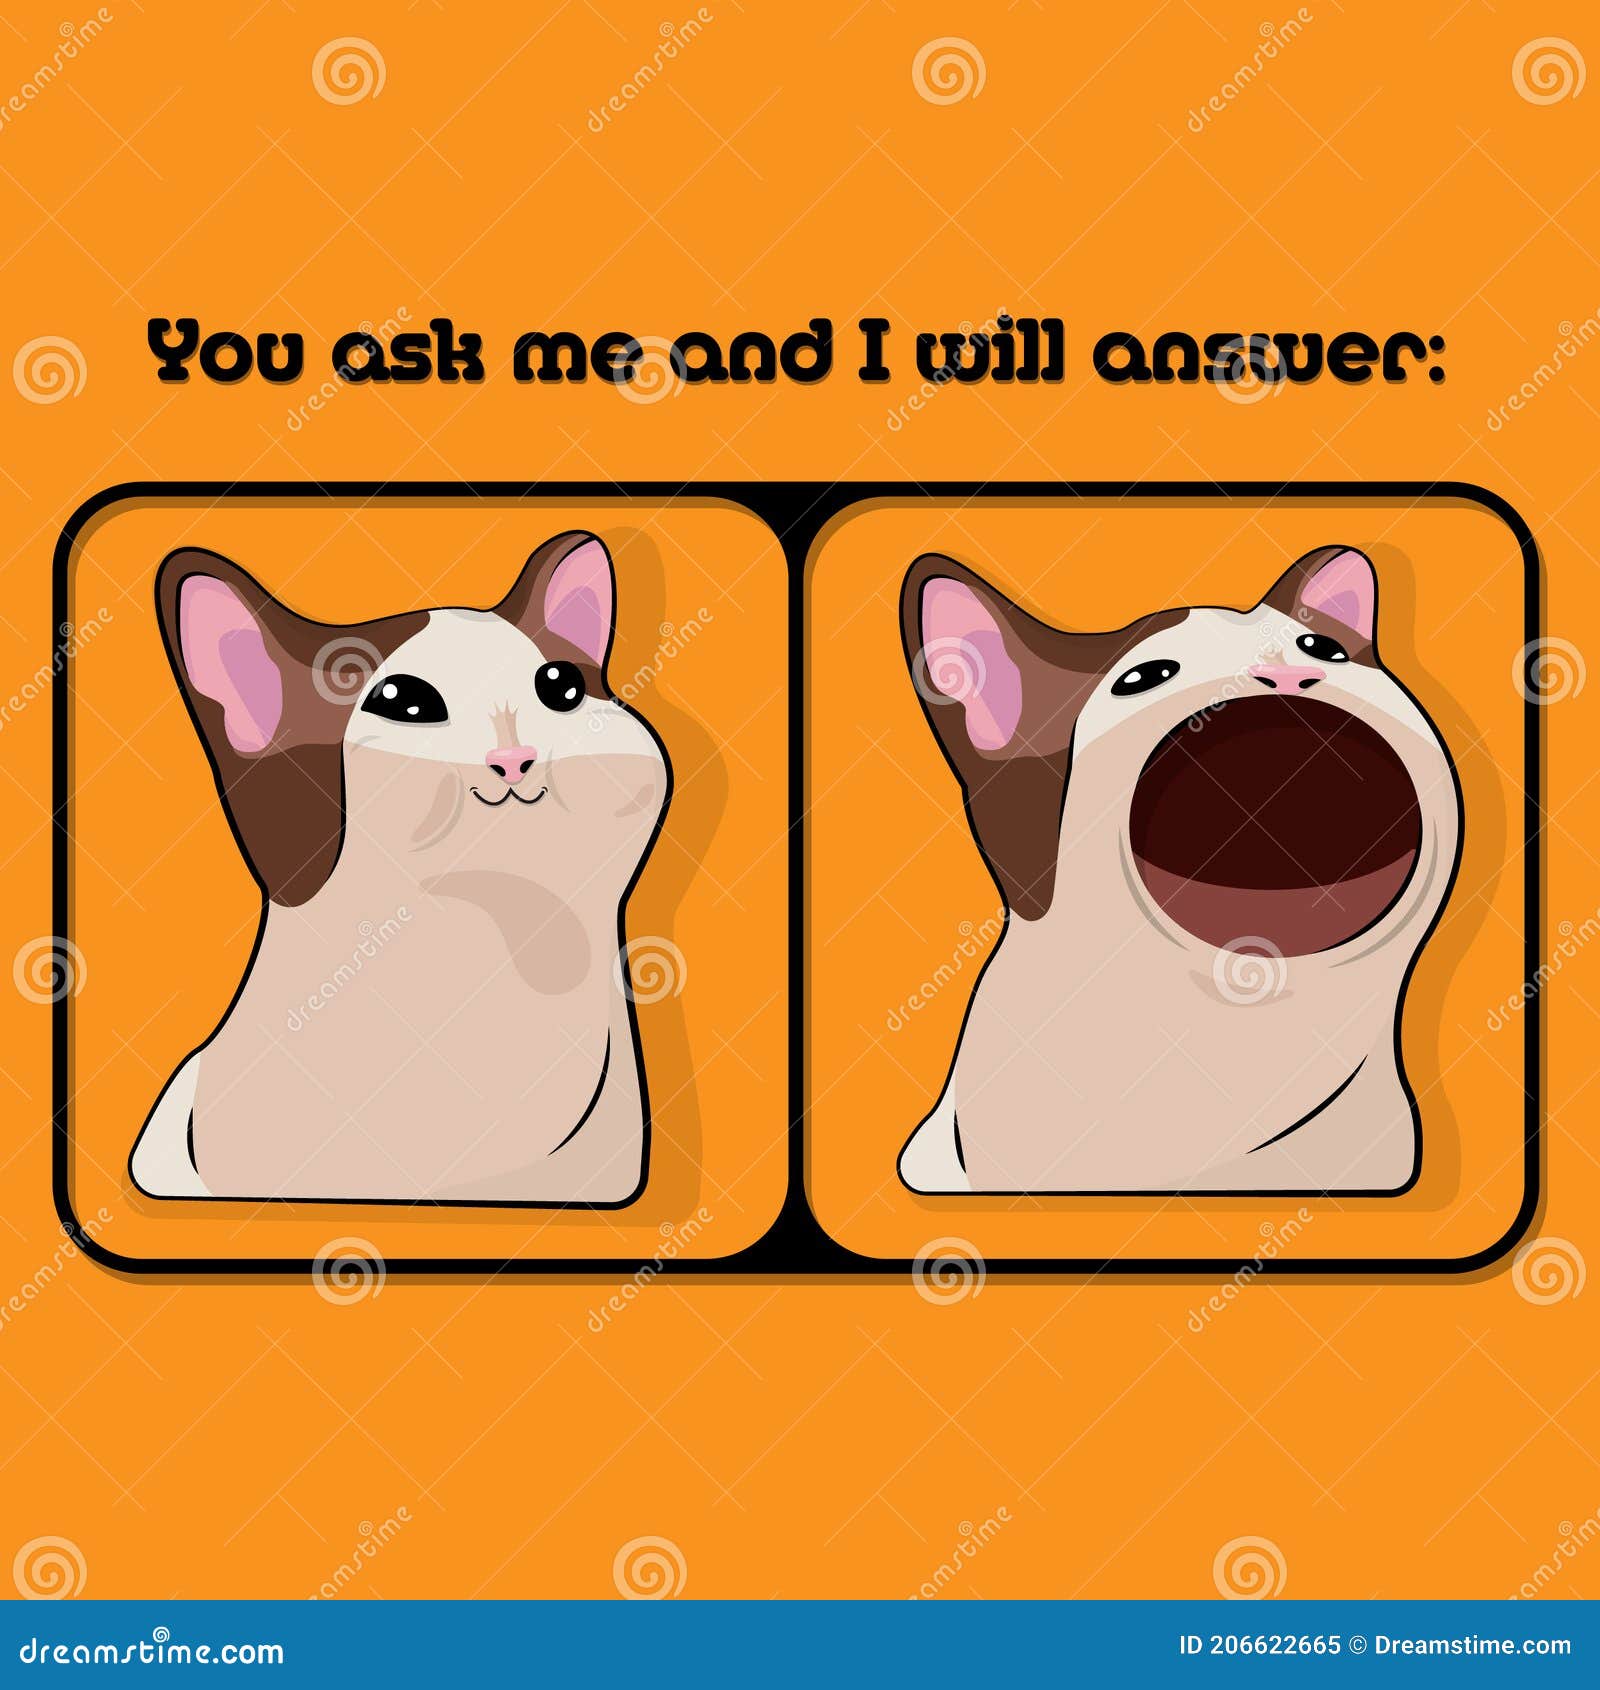 Cat Meme Vector Art, Icons, and Graphics for Free Download